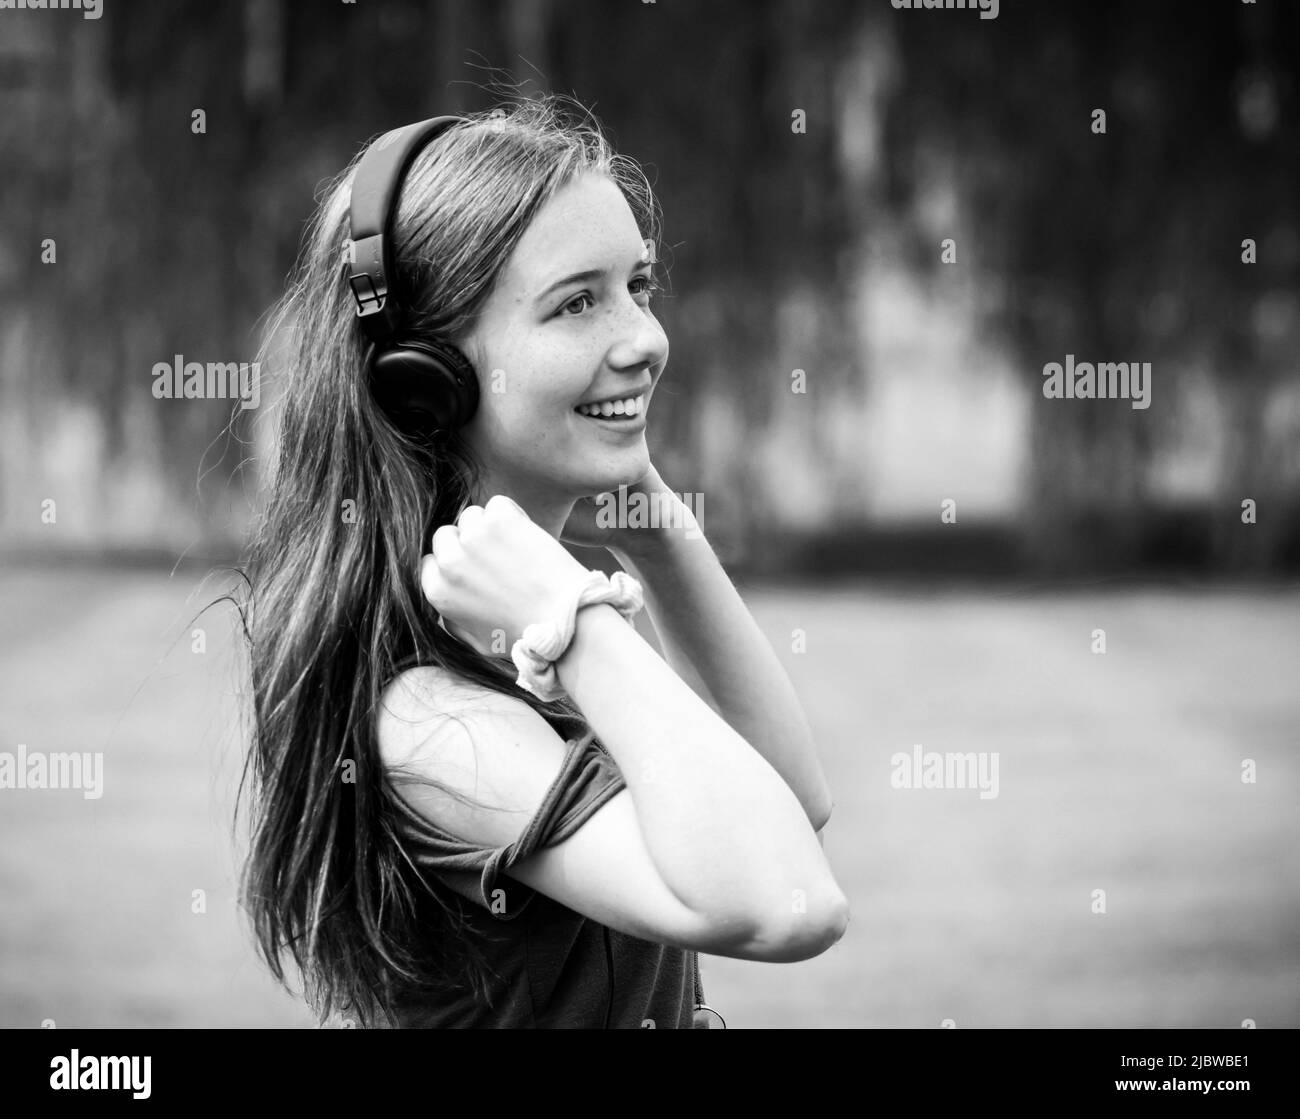 Young long haired teenage girl with earphones smiling on a lawn of grass with a willow tree in the background during summer in black and white Stock Photo